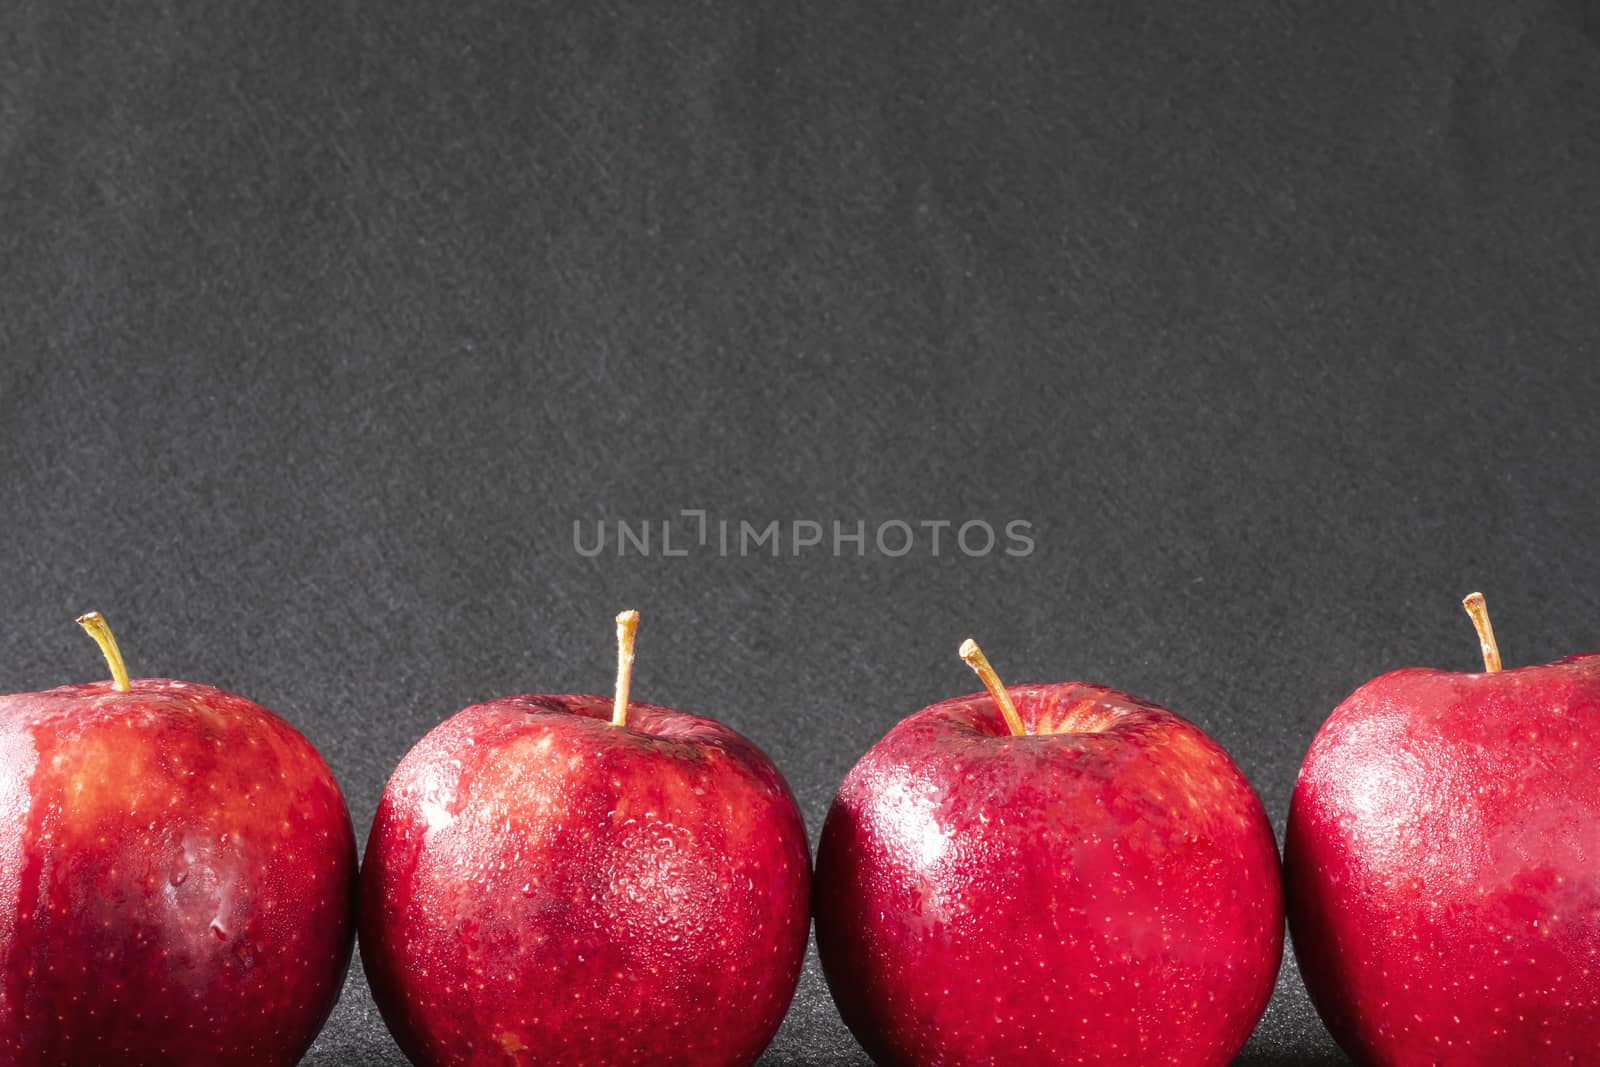 Fresh colorful apple with water drop on skin over gray background - clean fresh fruit background concept by pairhandmade